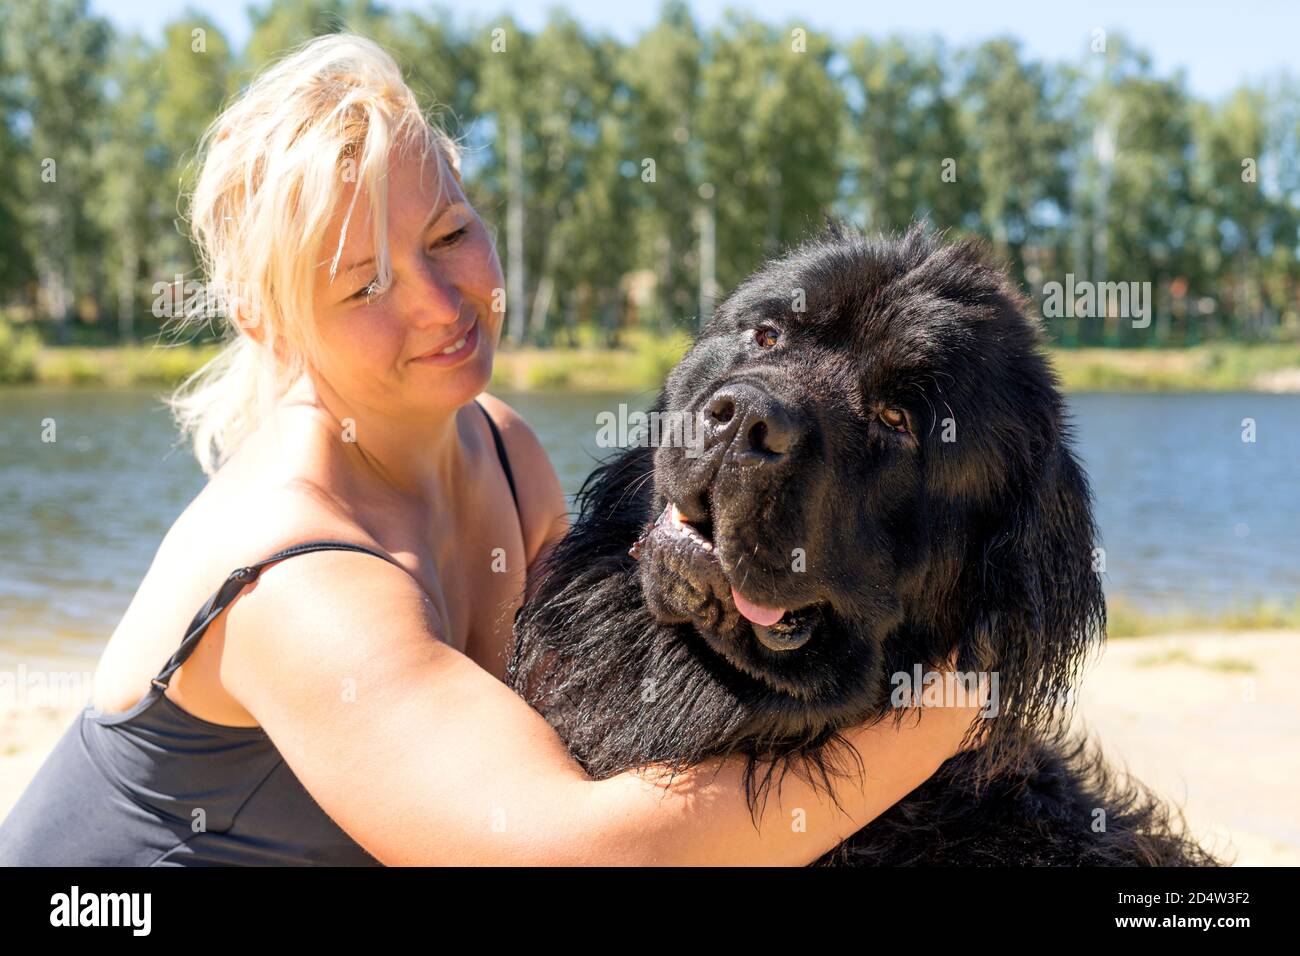 A smiling caucasian woman in a swimming suit hugs a Newfoundland dog after swimming in a lake. Stock Photo